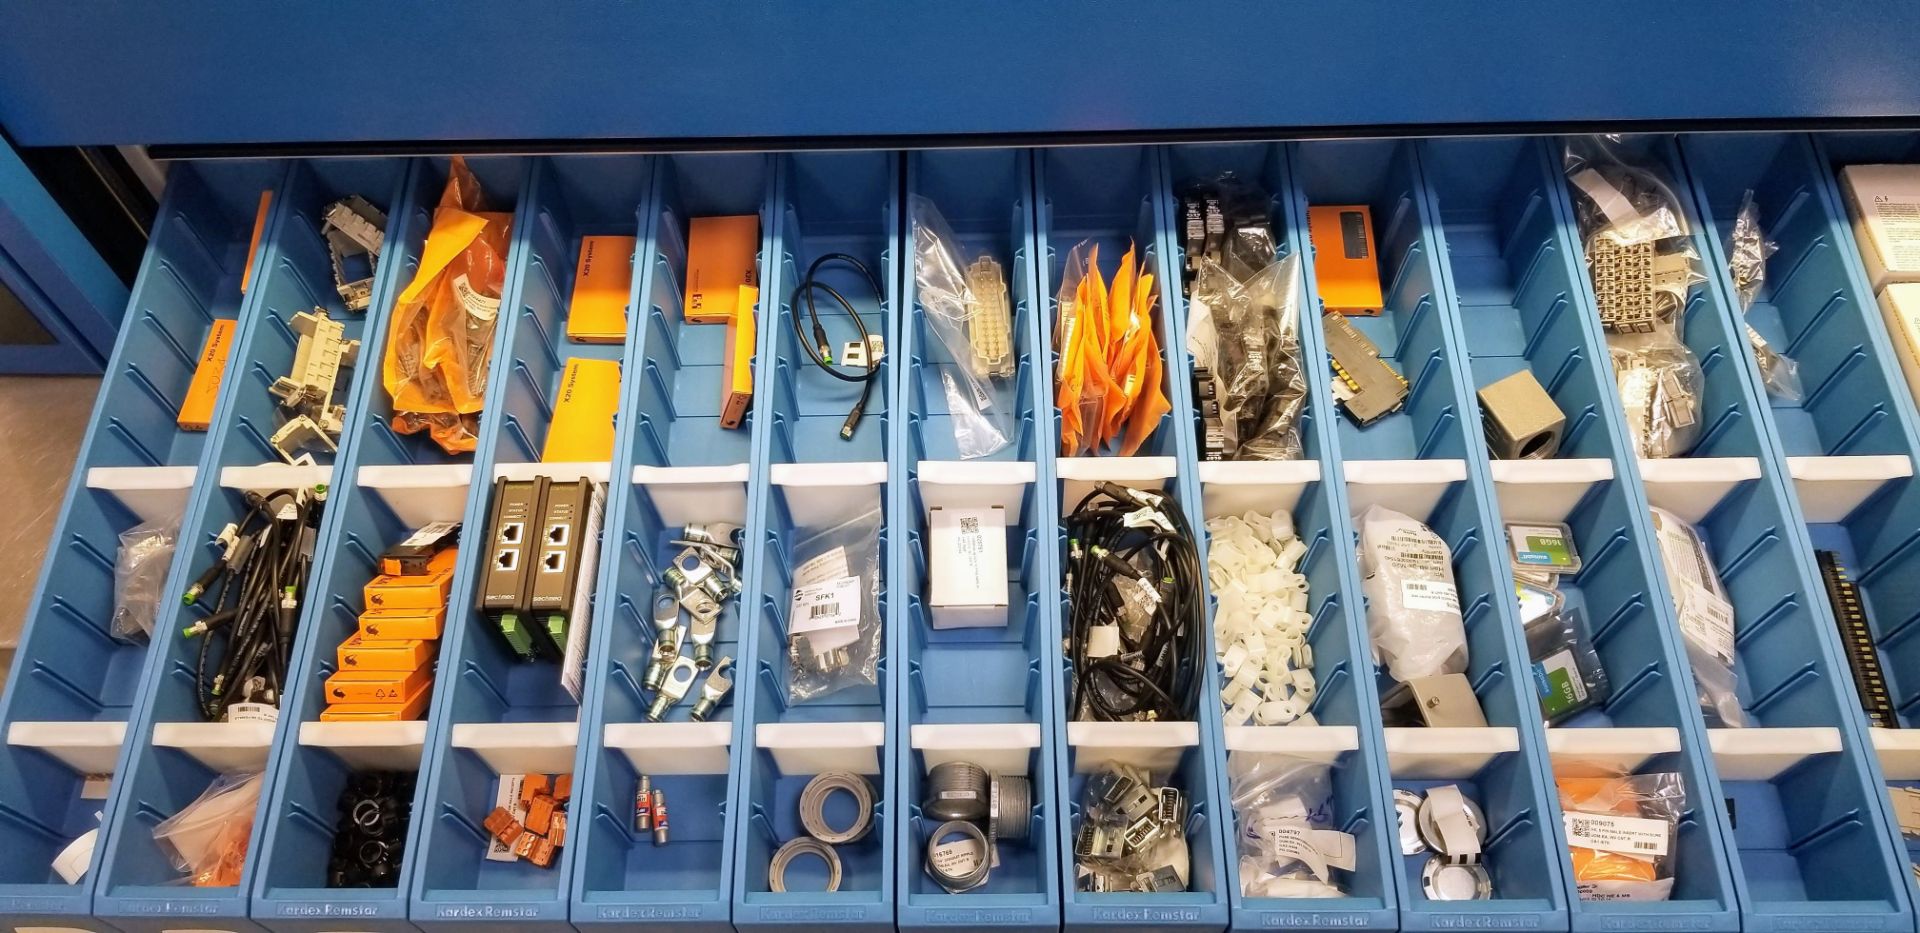 LOT - CONTENTS OF 36 SHELVES INCLUDING: MOTOR CABLES, HYBRID CABLES, PLUGS, INPUT CARDS, MODULES, - Image 61 of 100